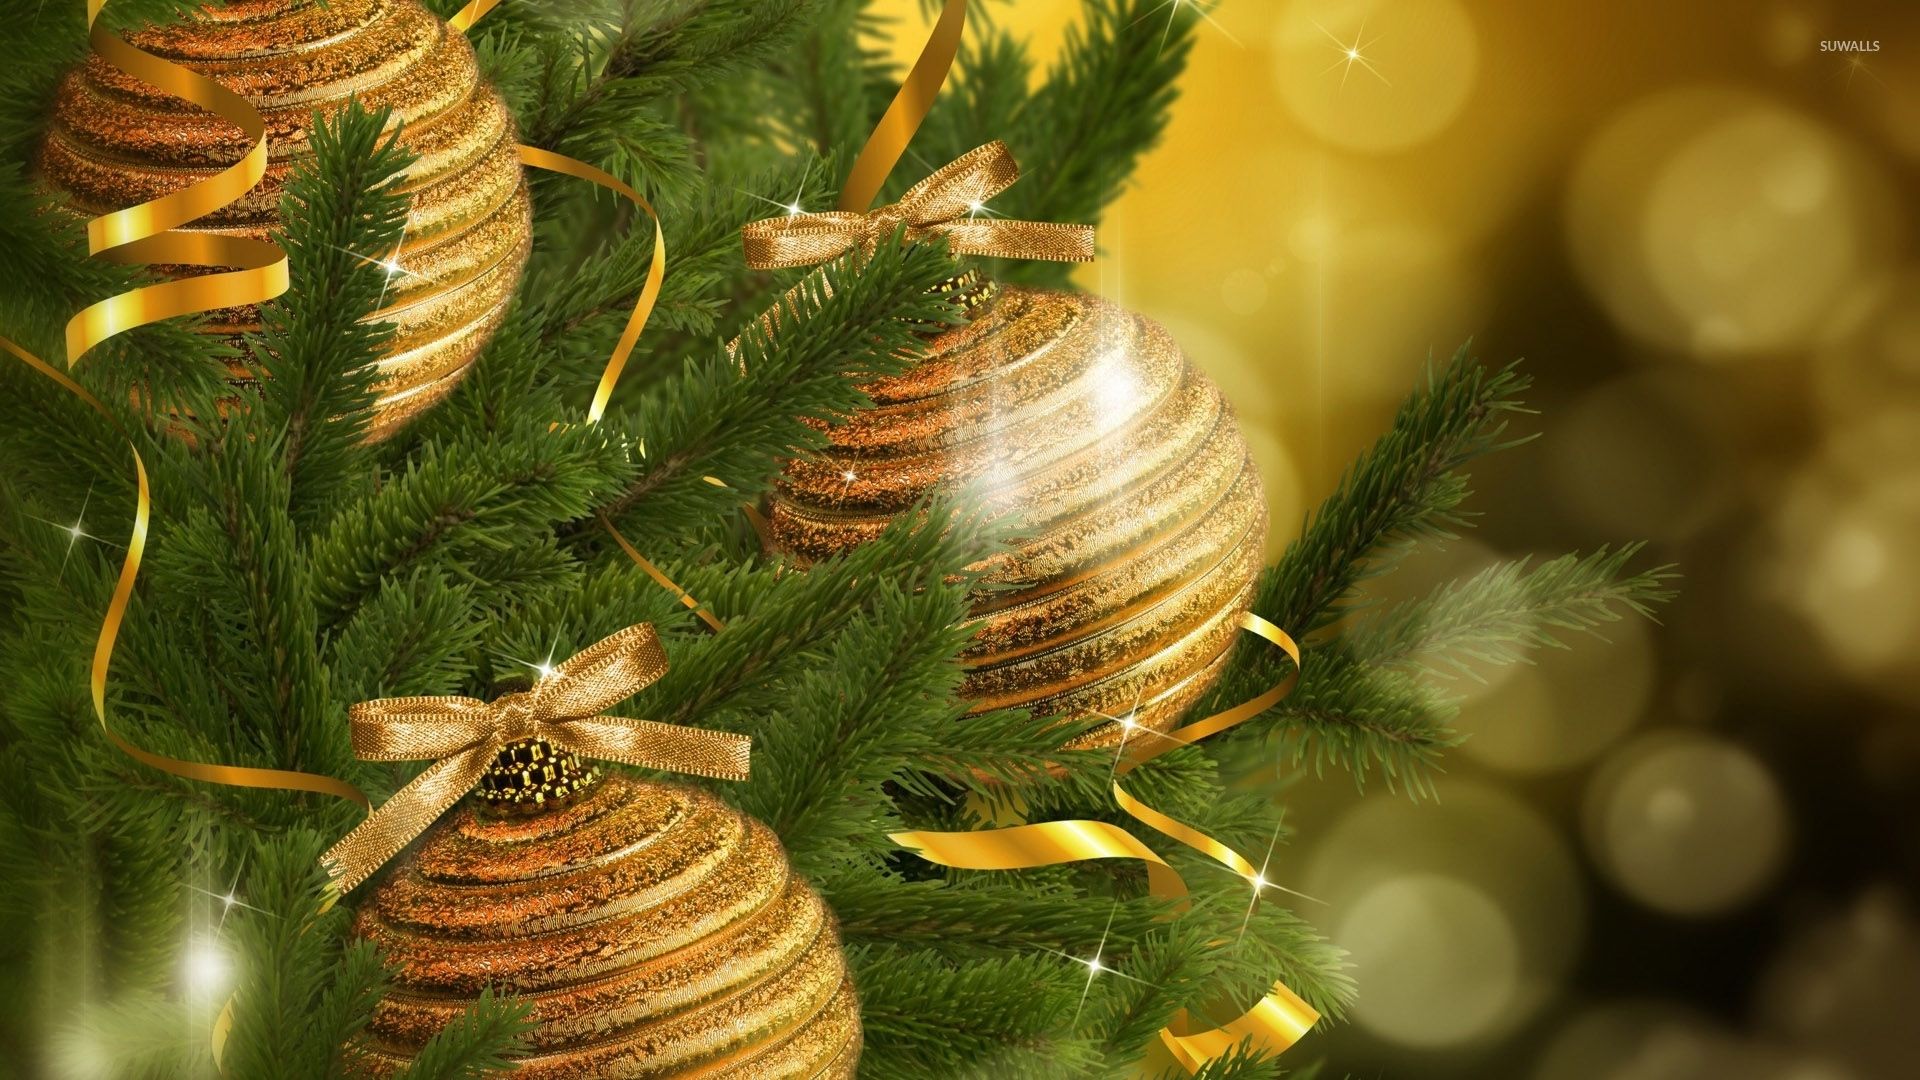 Sparkly golden baubles in the Christmas tree wallpaper wallpaper